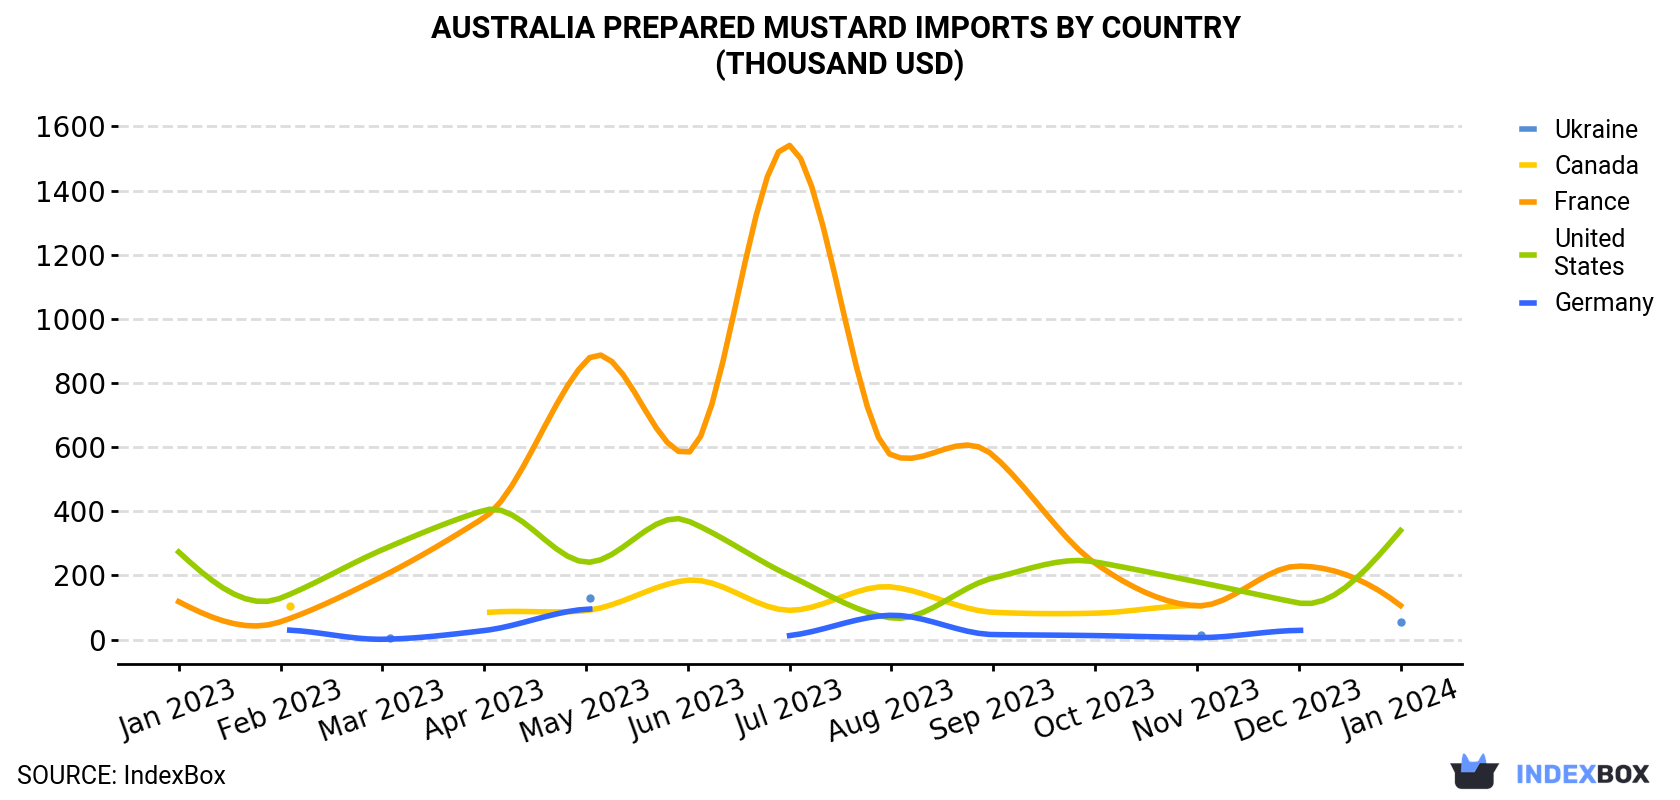 Australia Prepared Mustard Imports By Country (Thousand USD)